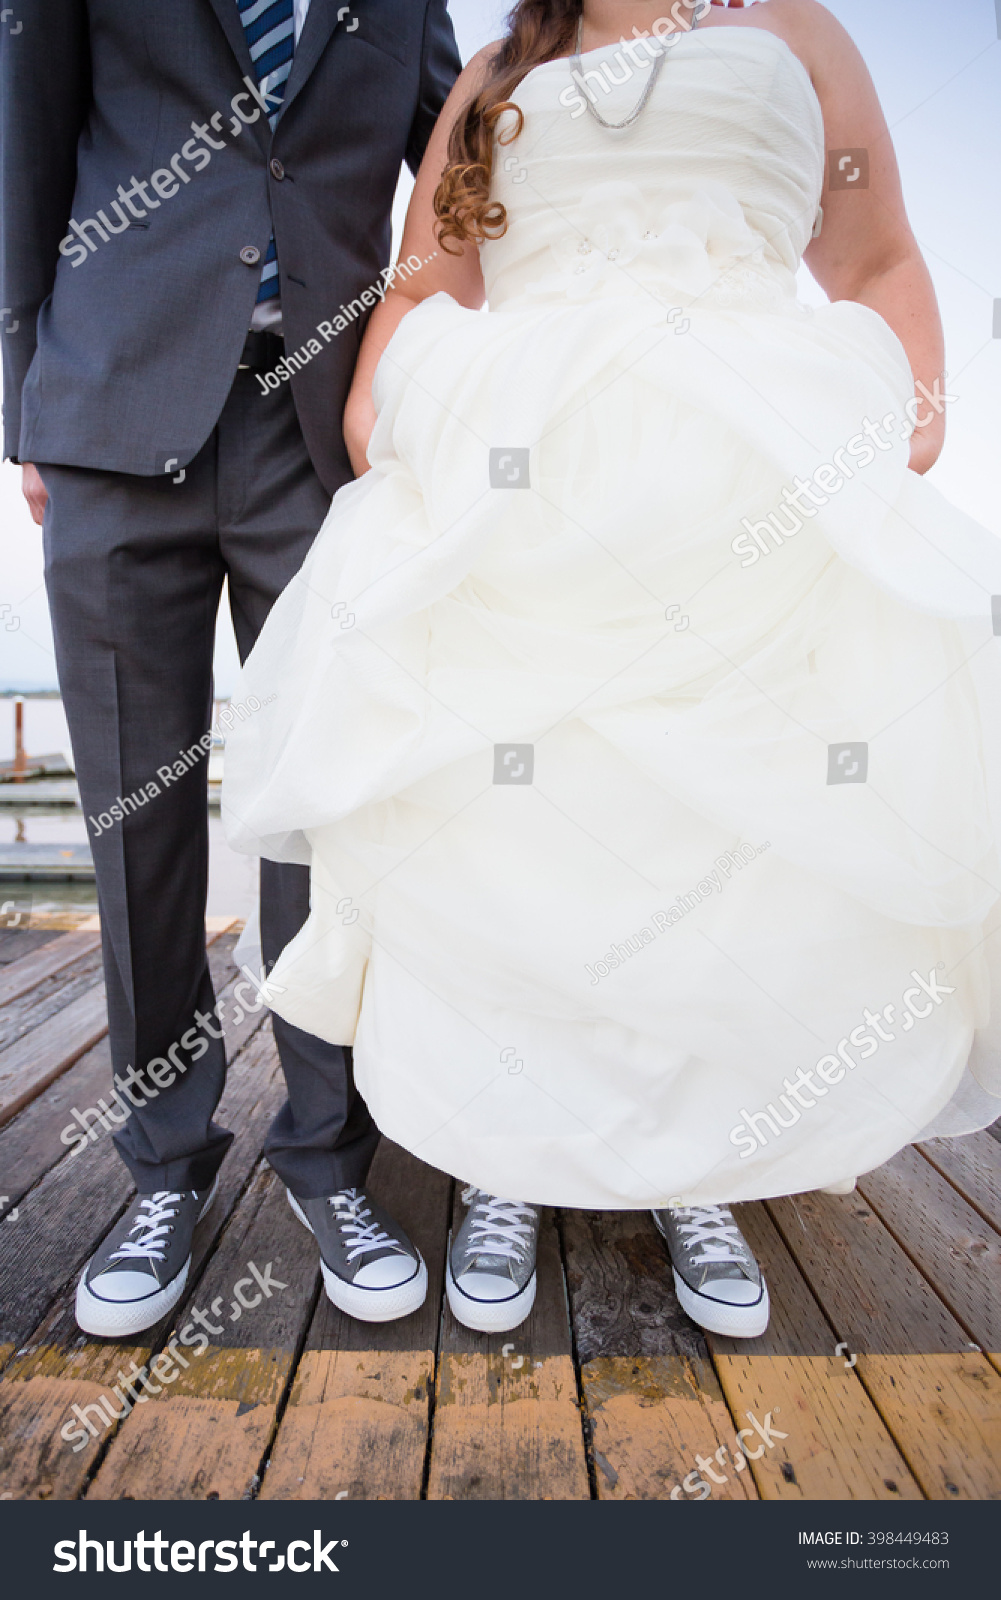 matching wedding shoes for bride and groom